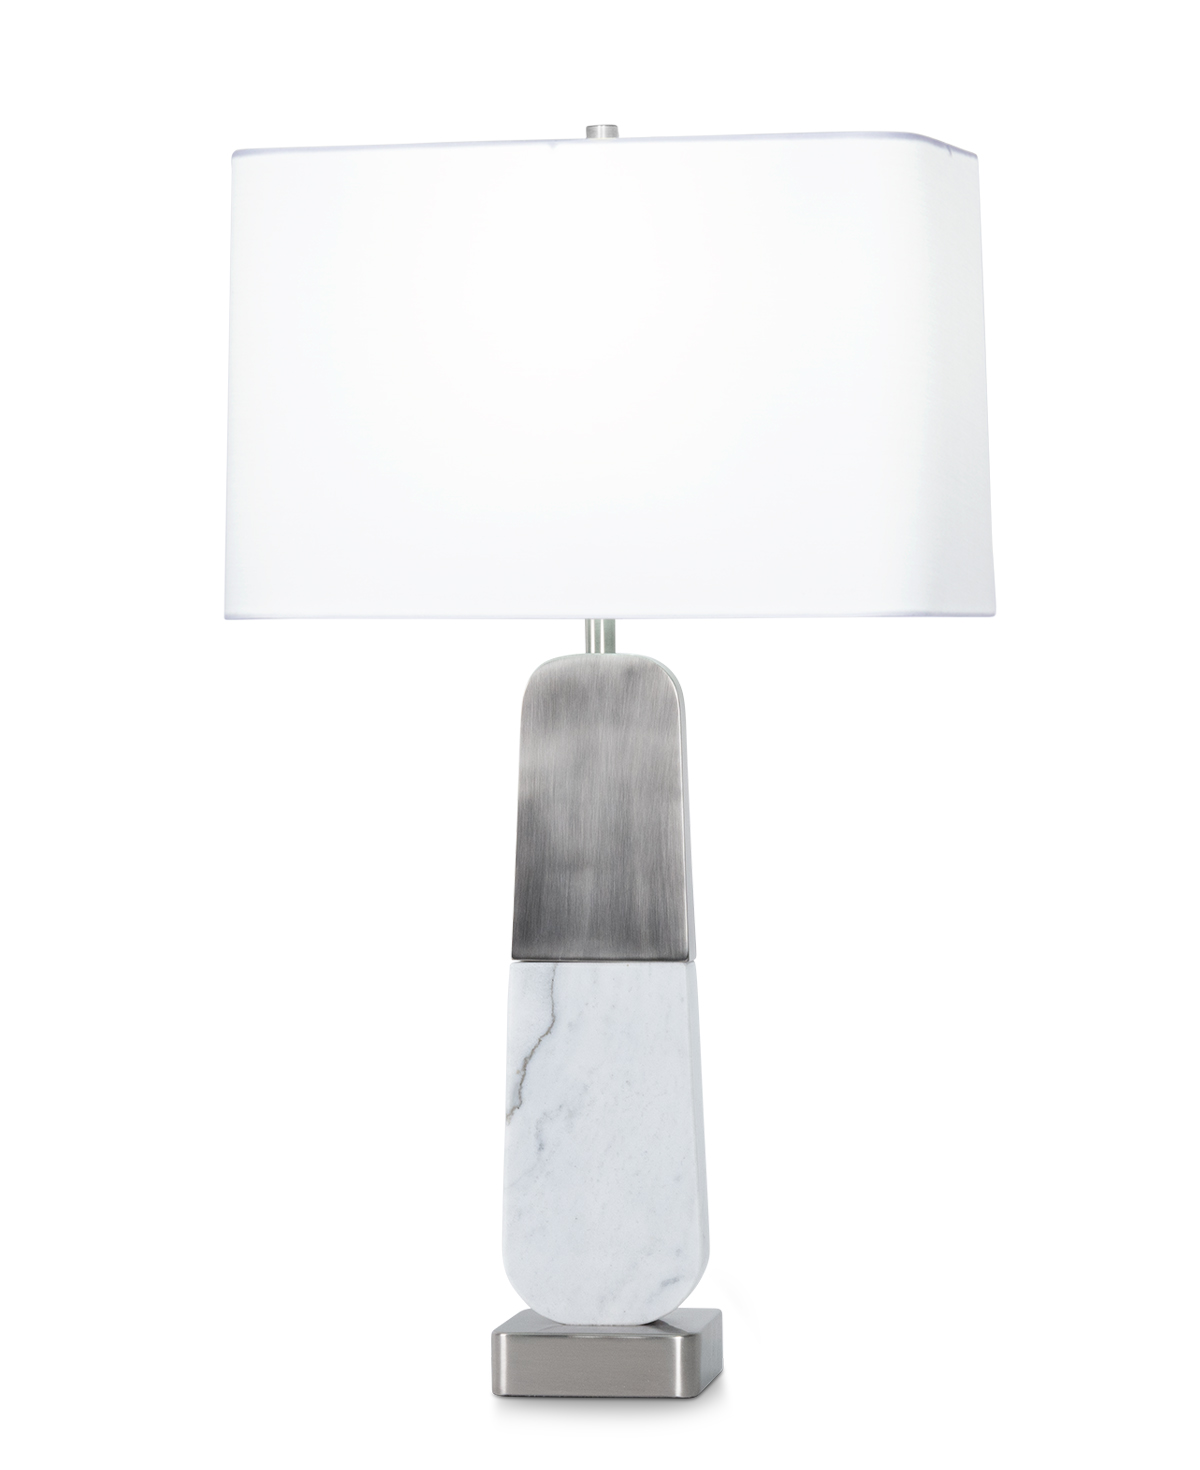 FlowDecor Naomi Table Lamp in white marble and metal with antique silver finish and white linen rounded rectangle shade (# 4559)